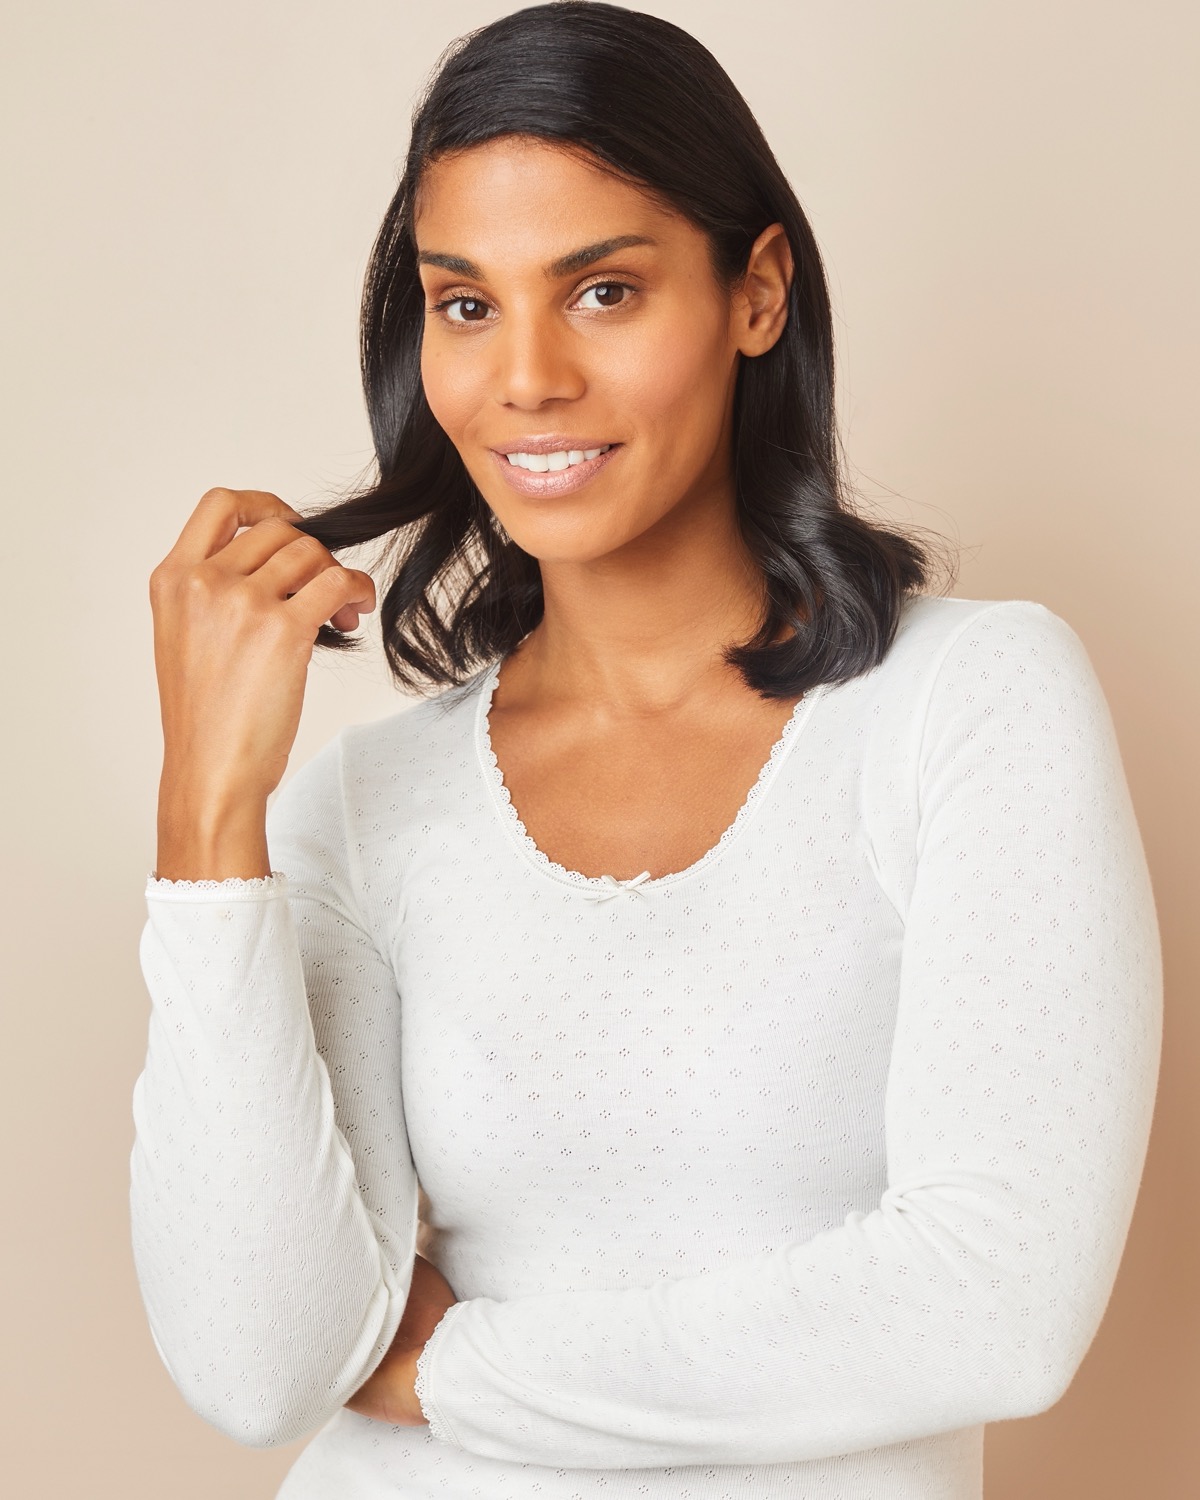 Dunnes Stores  Ivory Thermal Long-Sleeved Top